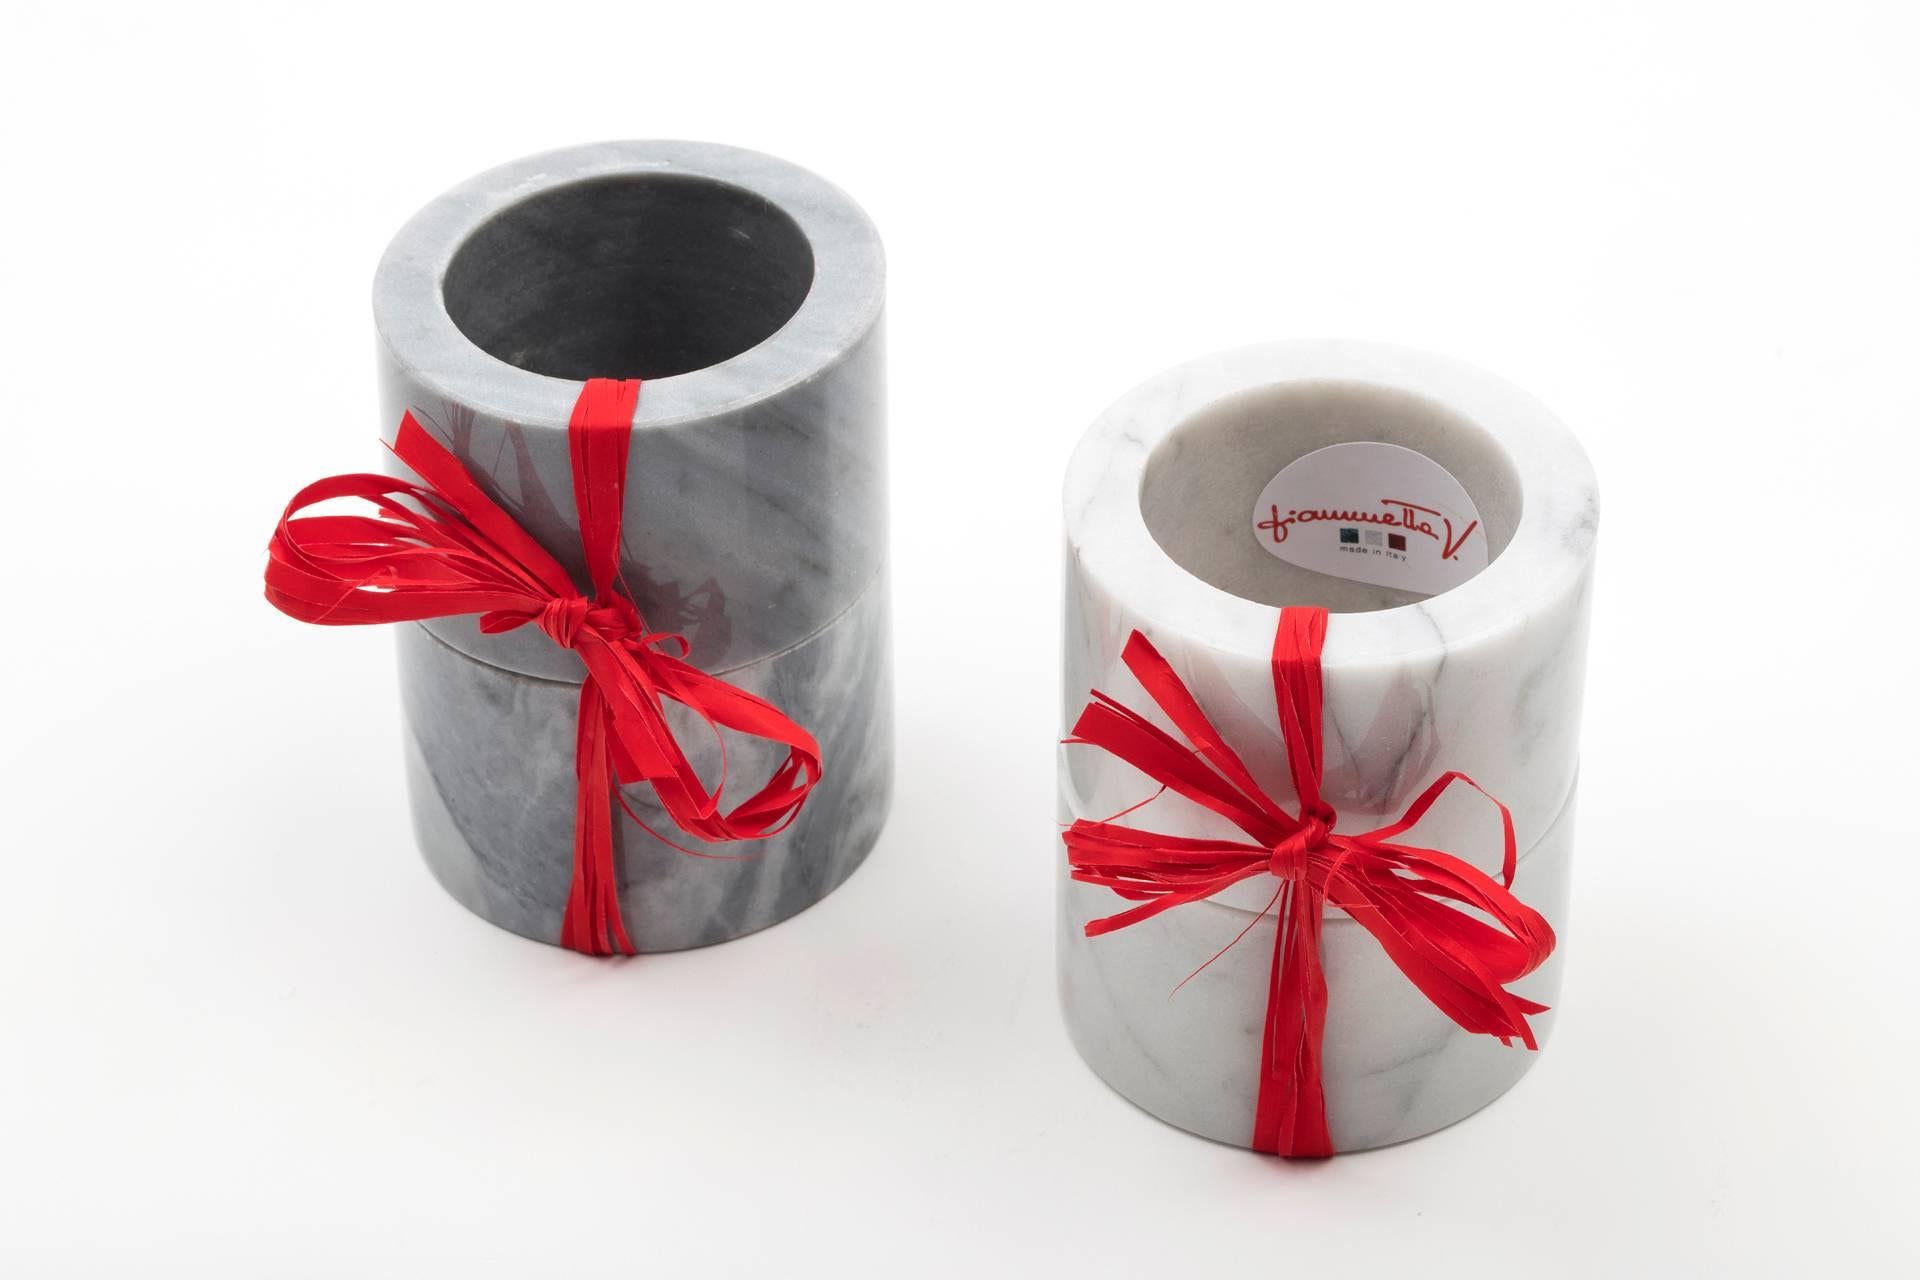 Set of two napkin rings in white Carrara marble with a rounded shape.
Each piece is in a way unique (since each marble block is different in veins and shades) and handcrafted in Italy. Slight variations in shape, color and size are to be considered